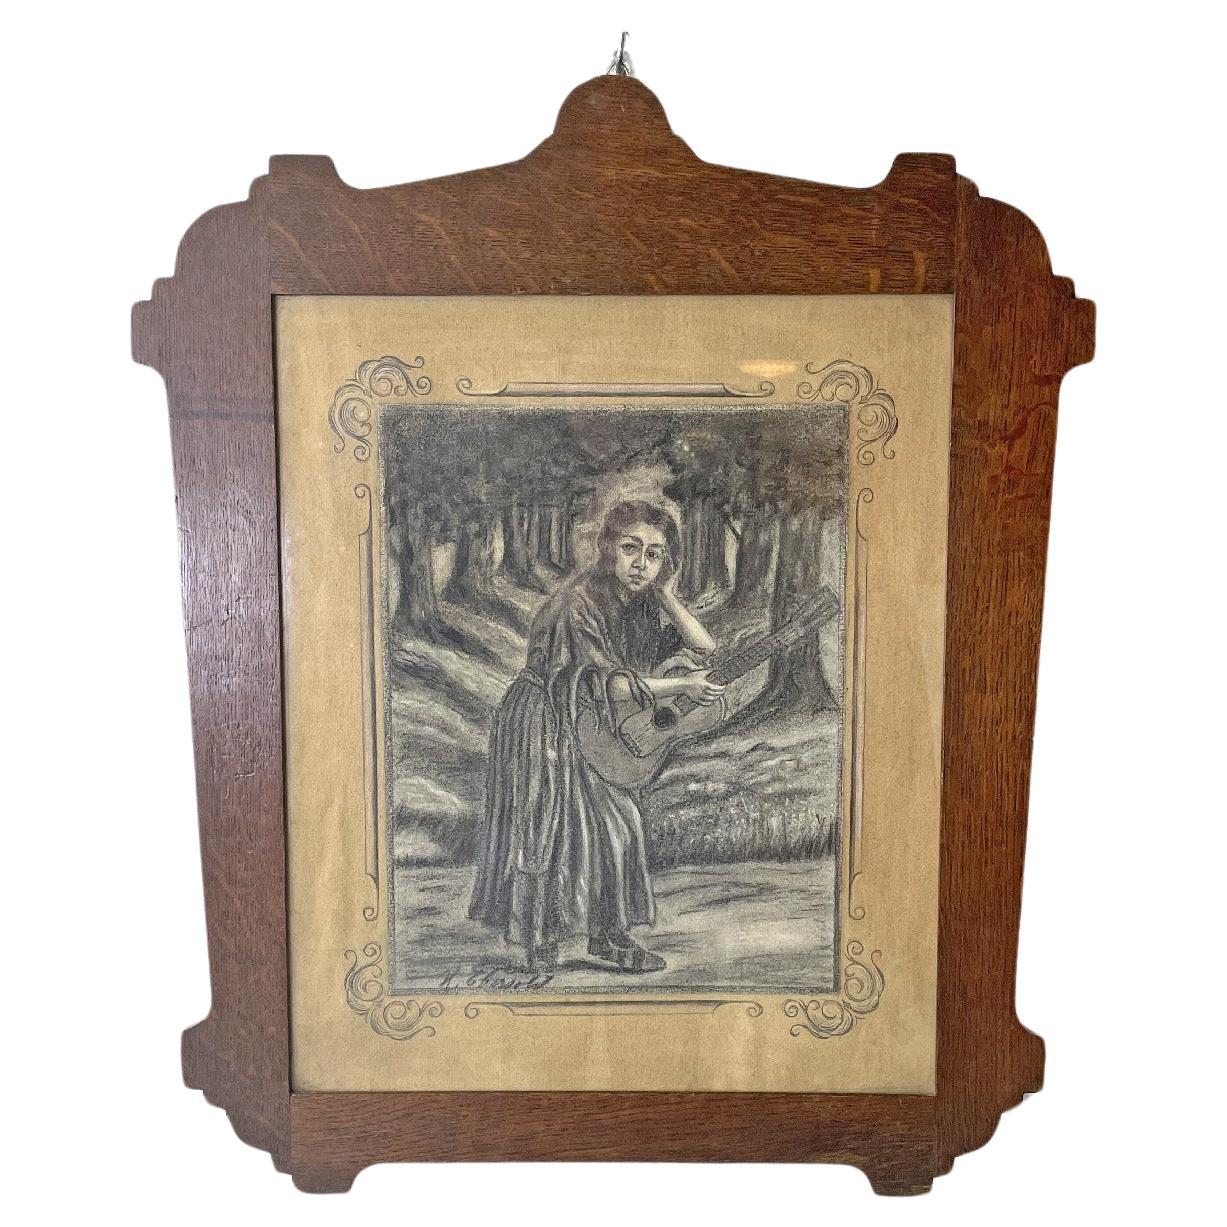 Italian Art Deco charcoal drawing with decorated wooden frame, 1930s